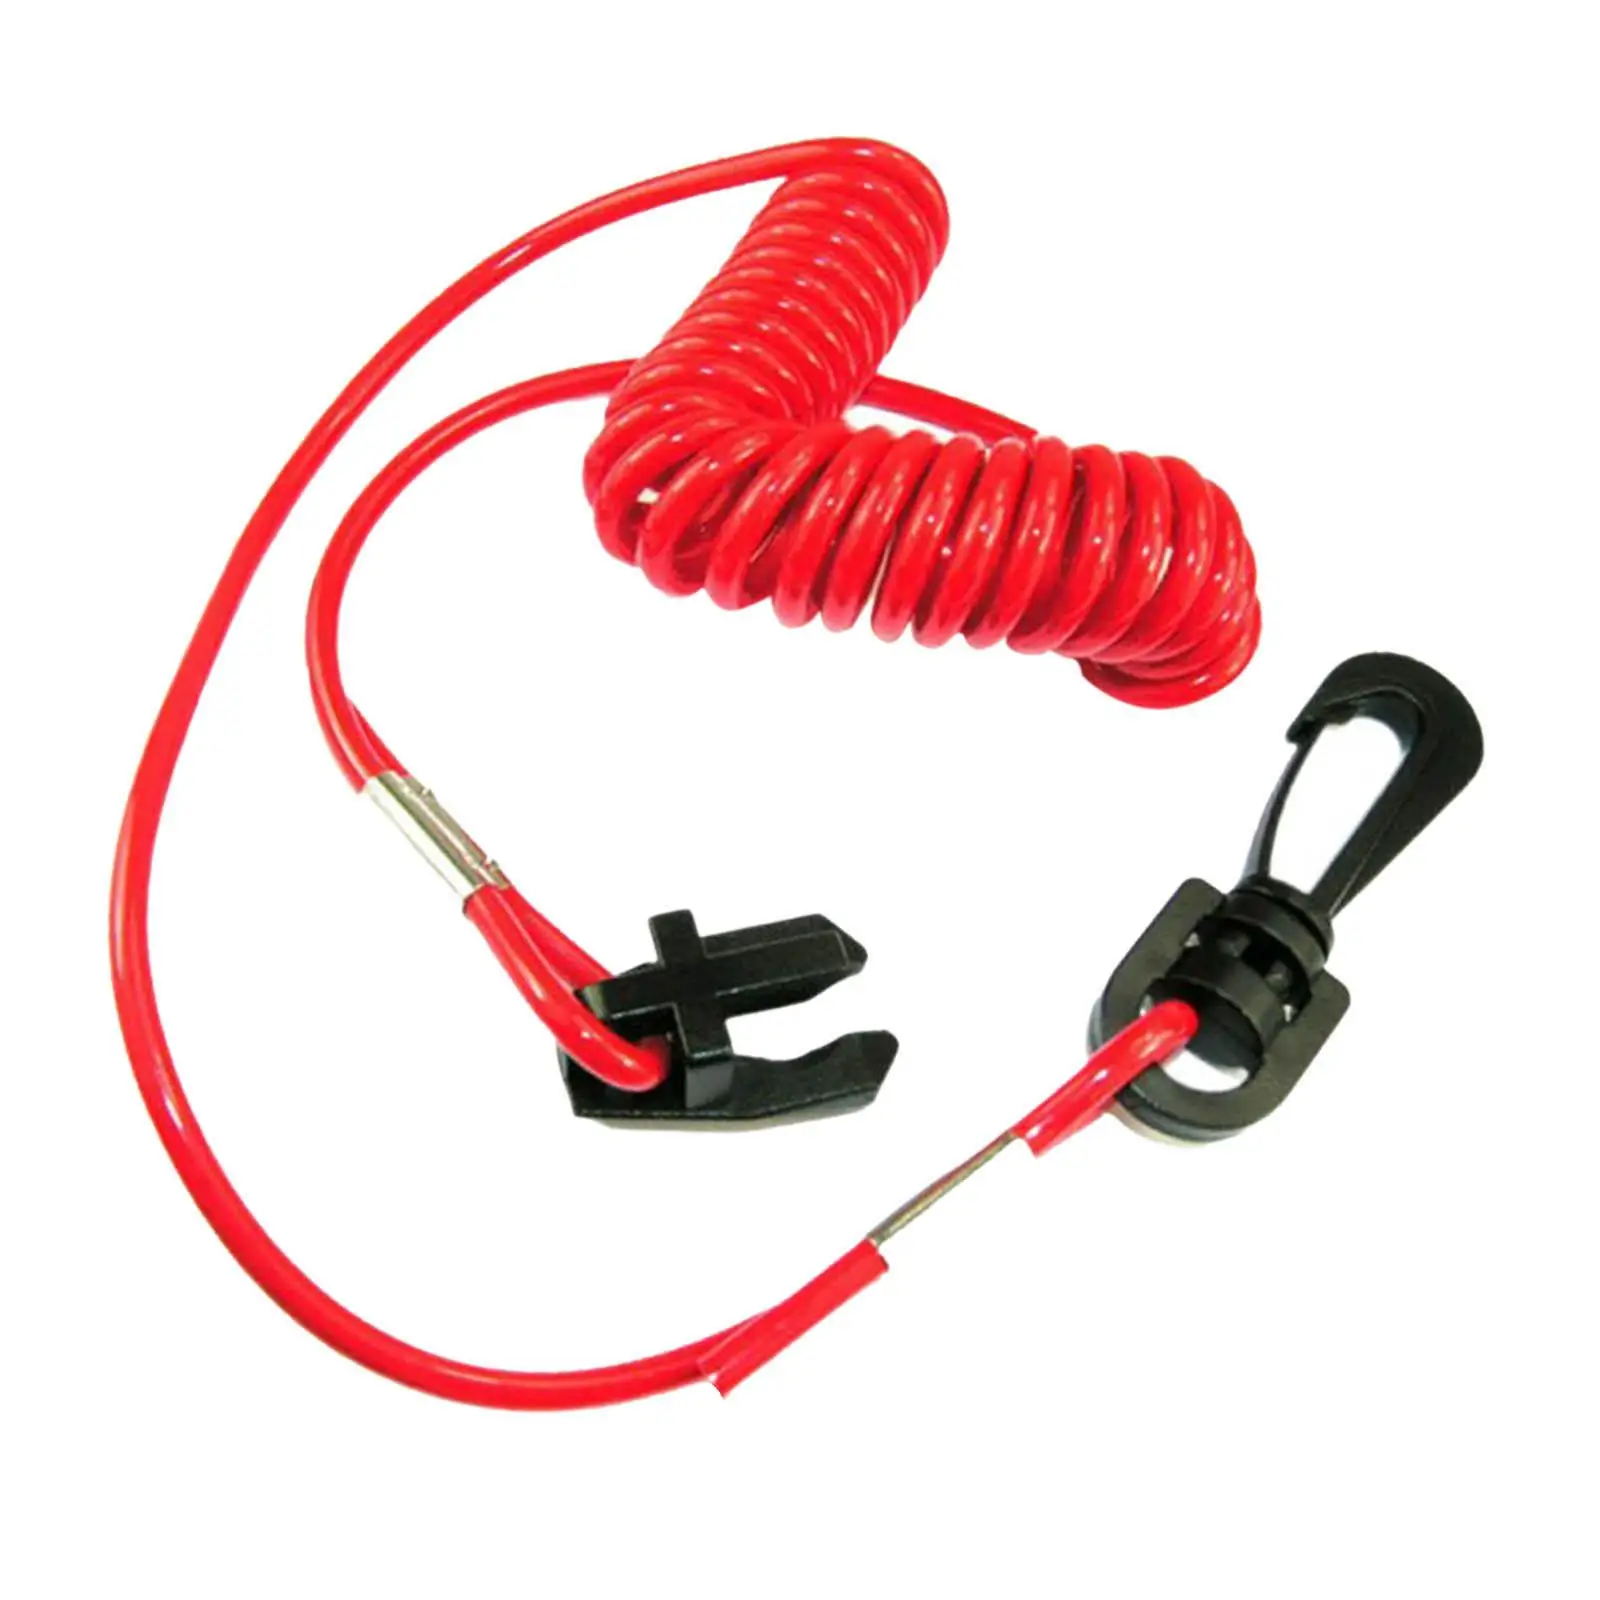 Outboard Engine Motor Safety Kill Stop Switch Lanyard, Red Safety Tether for for